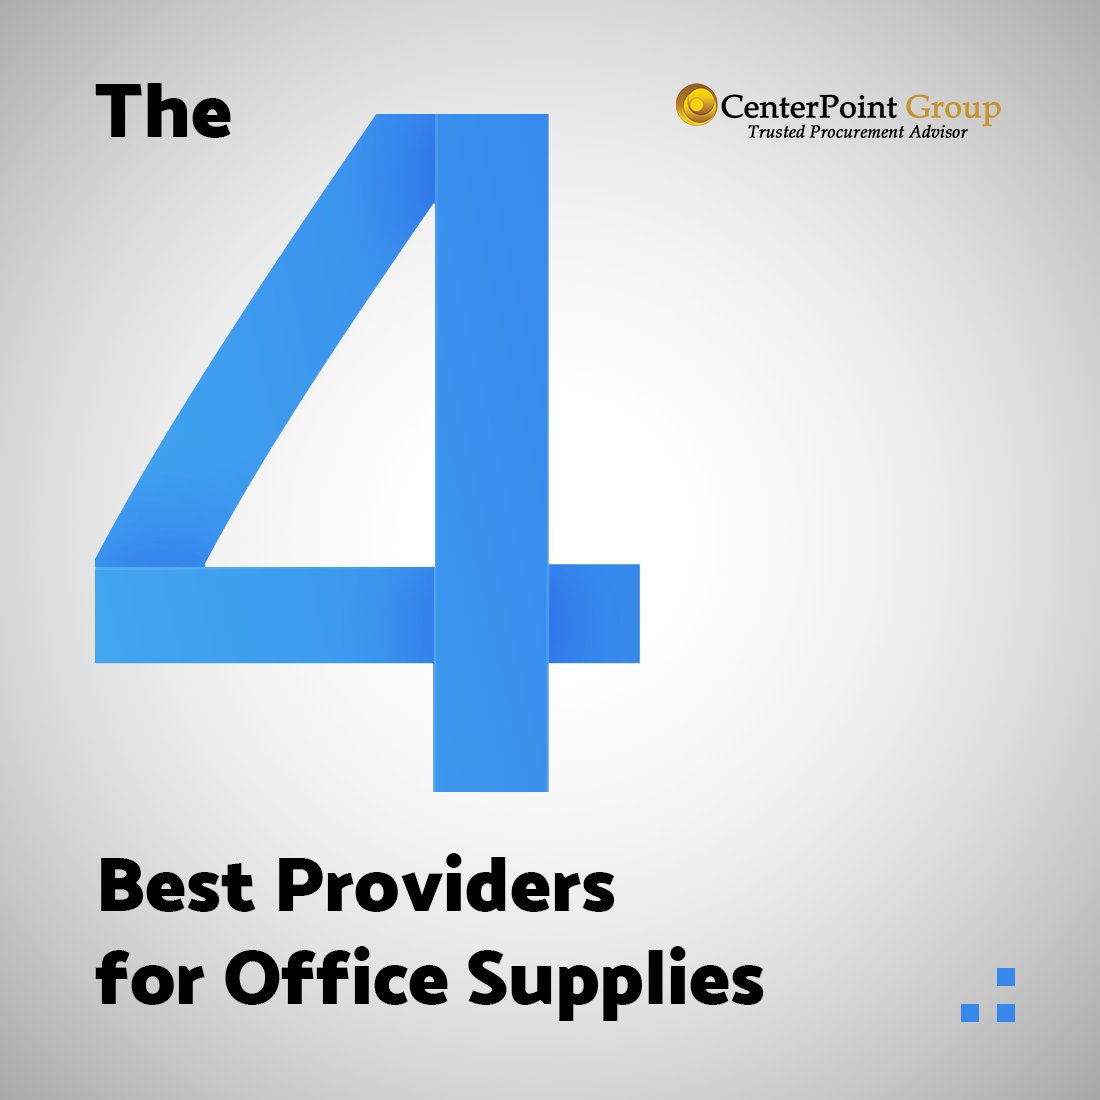 📎 Upgrade your #OfficeSupplies game with these top suppliers! 💼✨

1️⃣ @AmazonBusiness 2️⃣ @ODPBusiness 3️⃣ @Staples 4️⃣ @WBMasonCo 

Which supplier suits your office needs best? 
#OfficeNeeds #Materials #Supplies #Procurement #IndirectSpend #BusinessSolutions #Purchasing #GPO